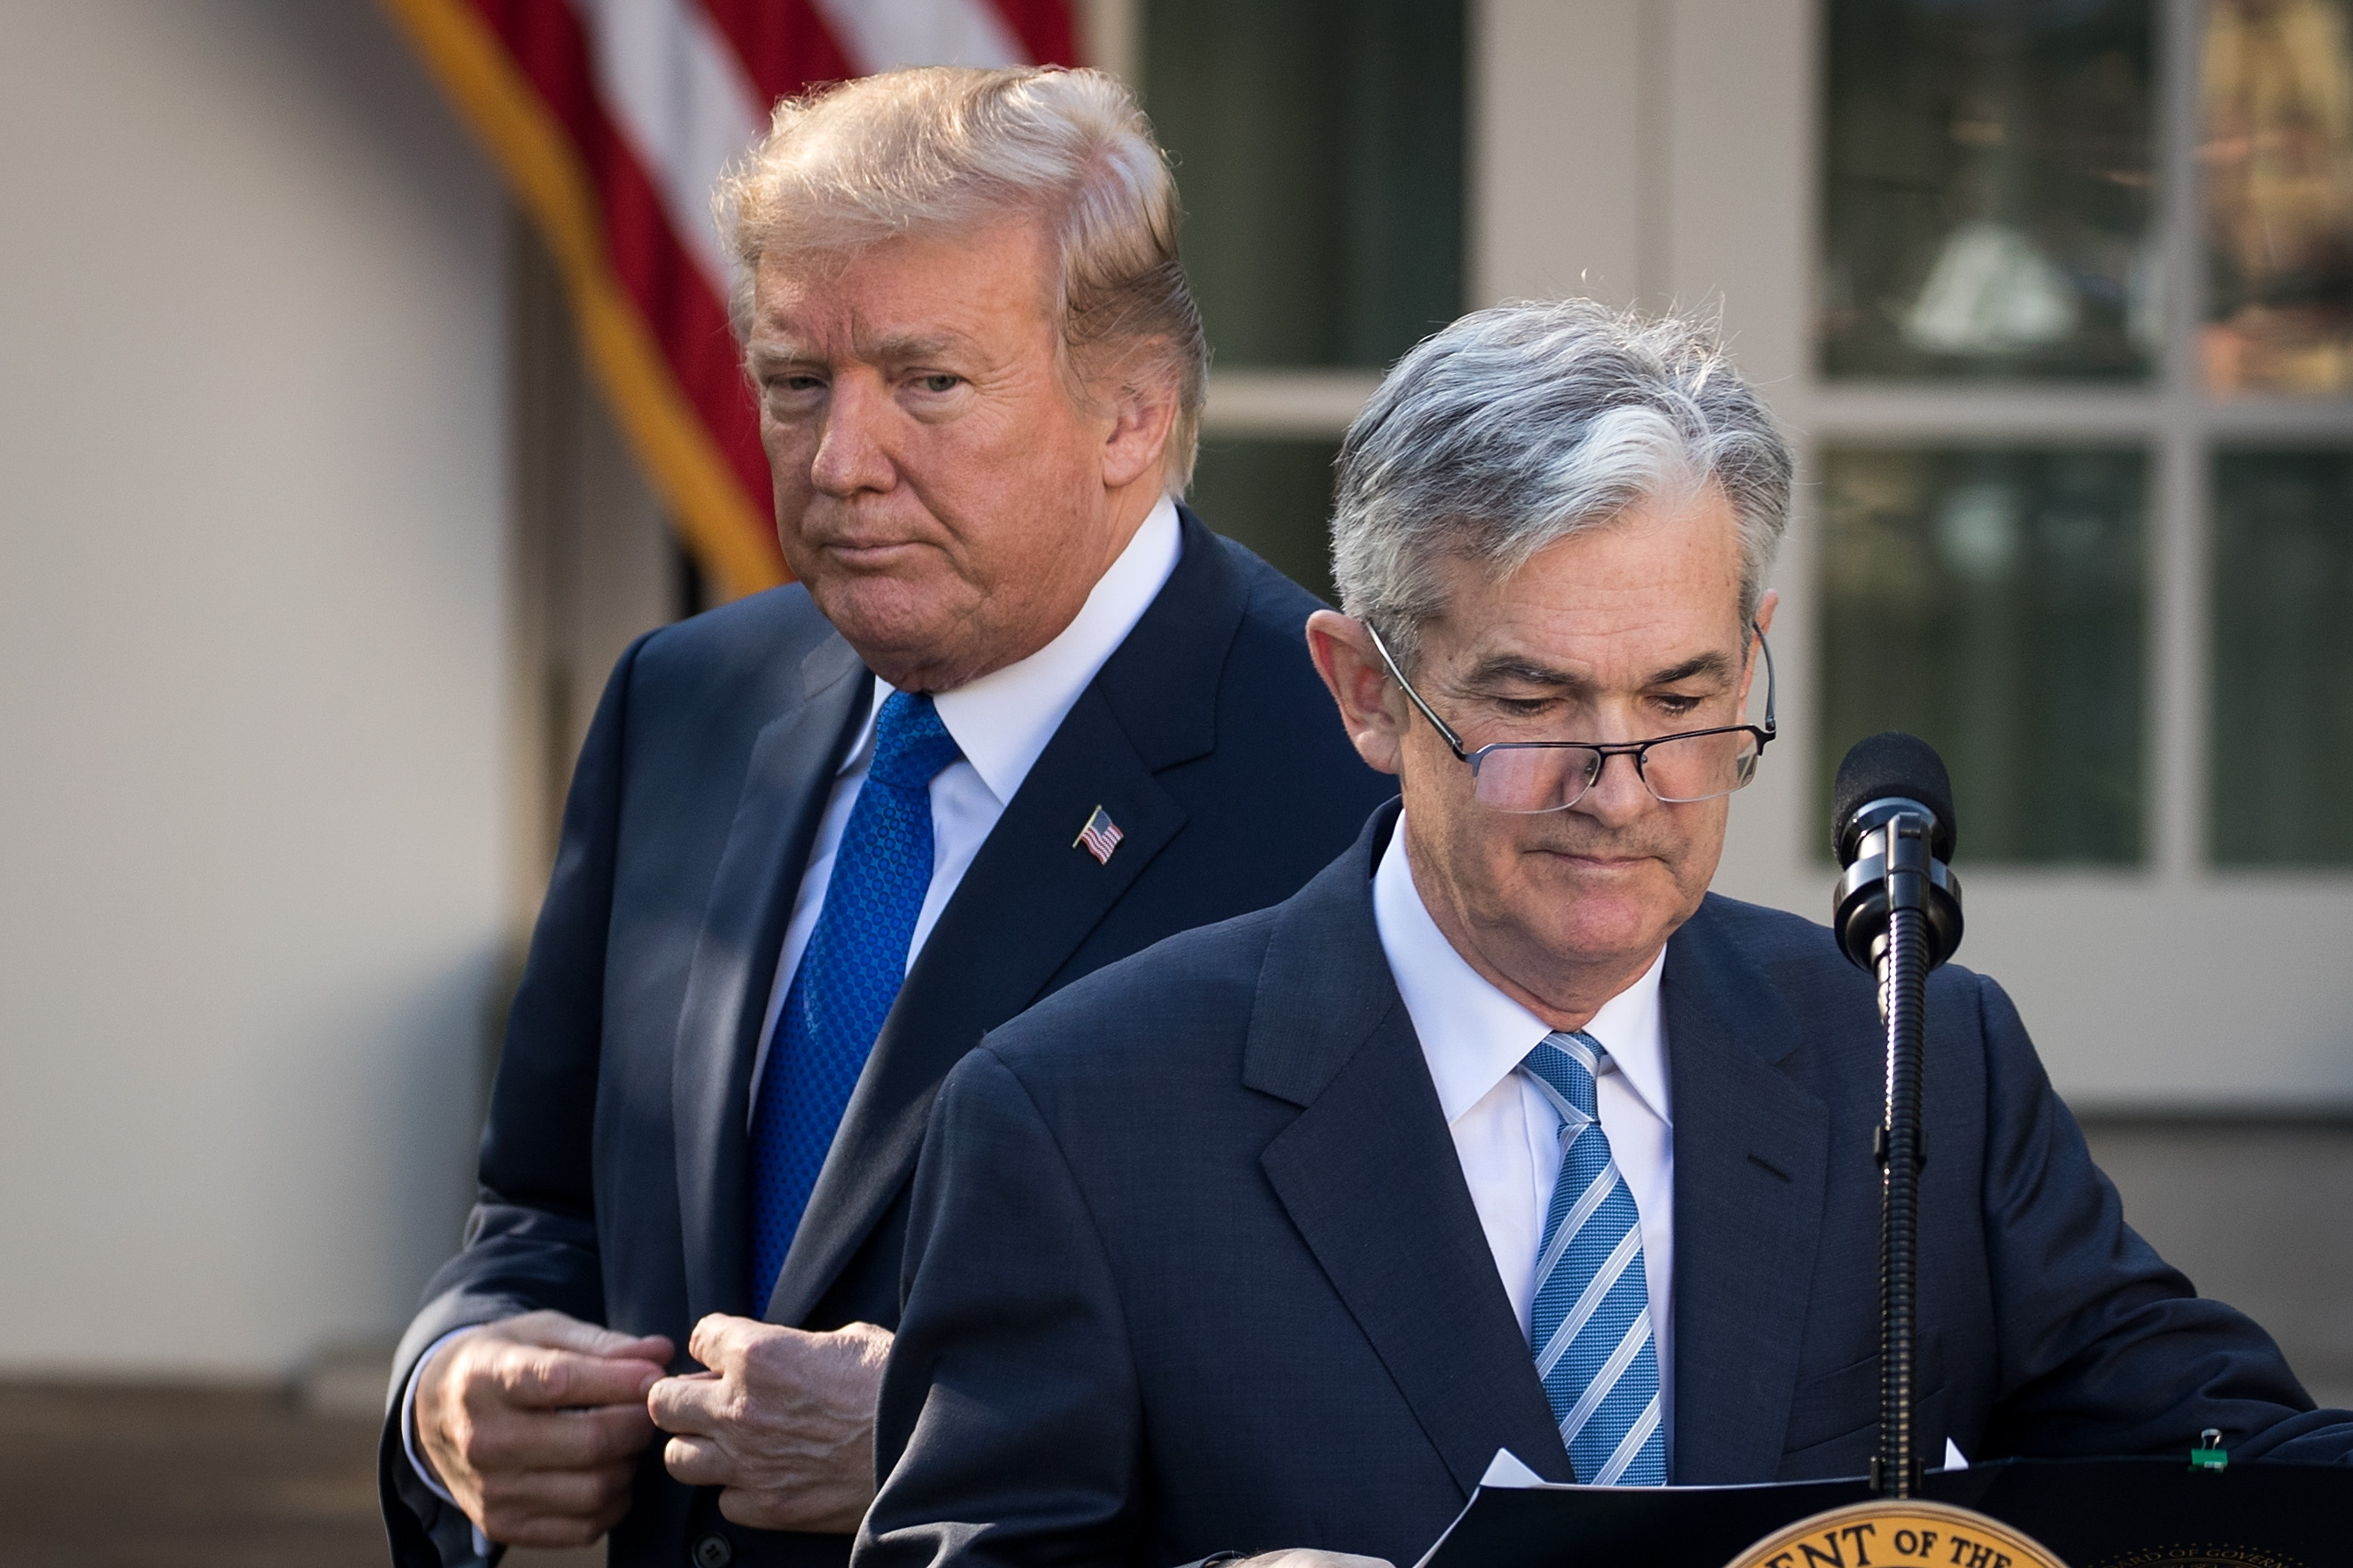 (L to R) U.S. President Donald Trump looks on as his nominee for the chairman of the Federal Reserve Jerome Powell takes to the podium during a press event in the Rose Garden at the White House, November 2, 2017 in Washington, DC. Photo by Drew Angerer/Getty Images